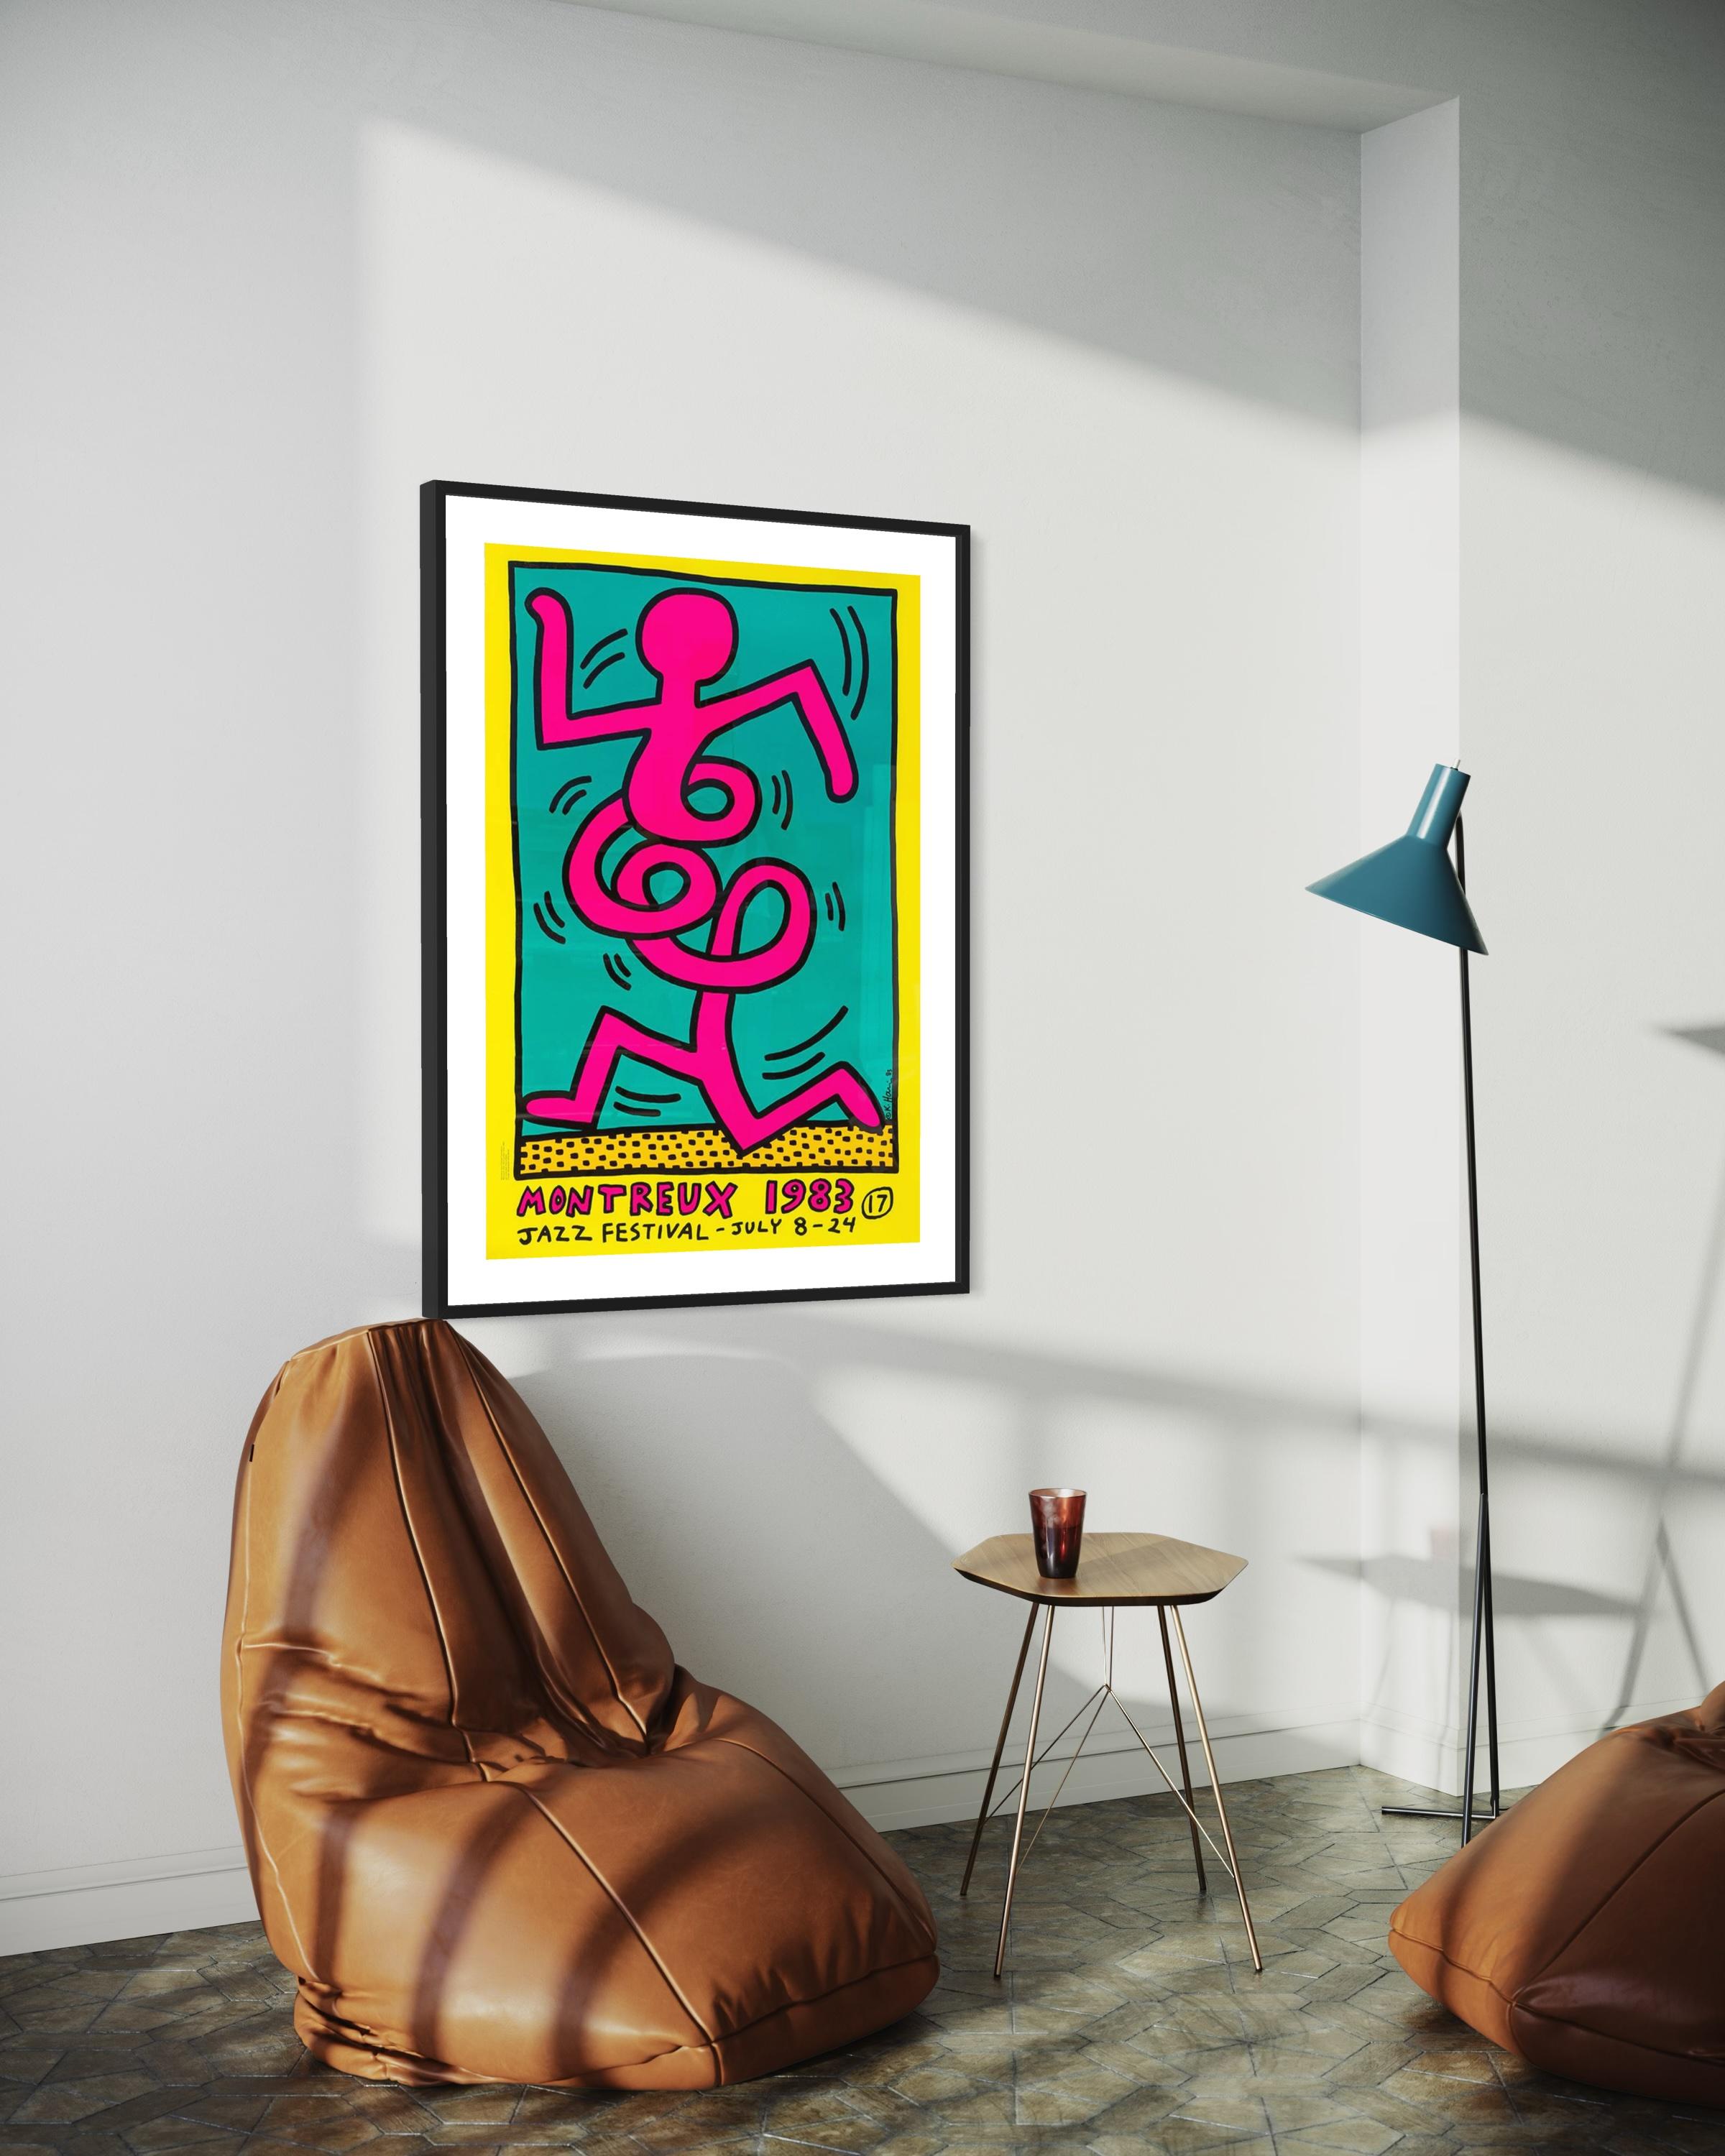 Montreux Jazz Festival 1983 (Yellow) - Print by Keith Haring